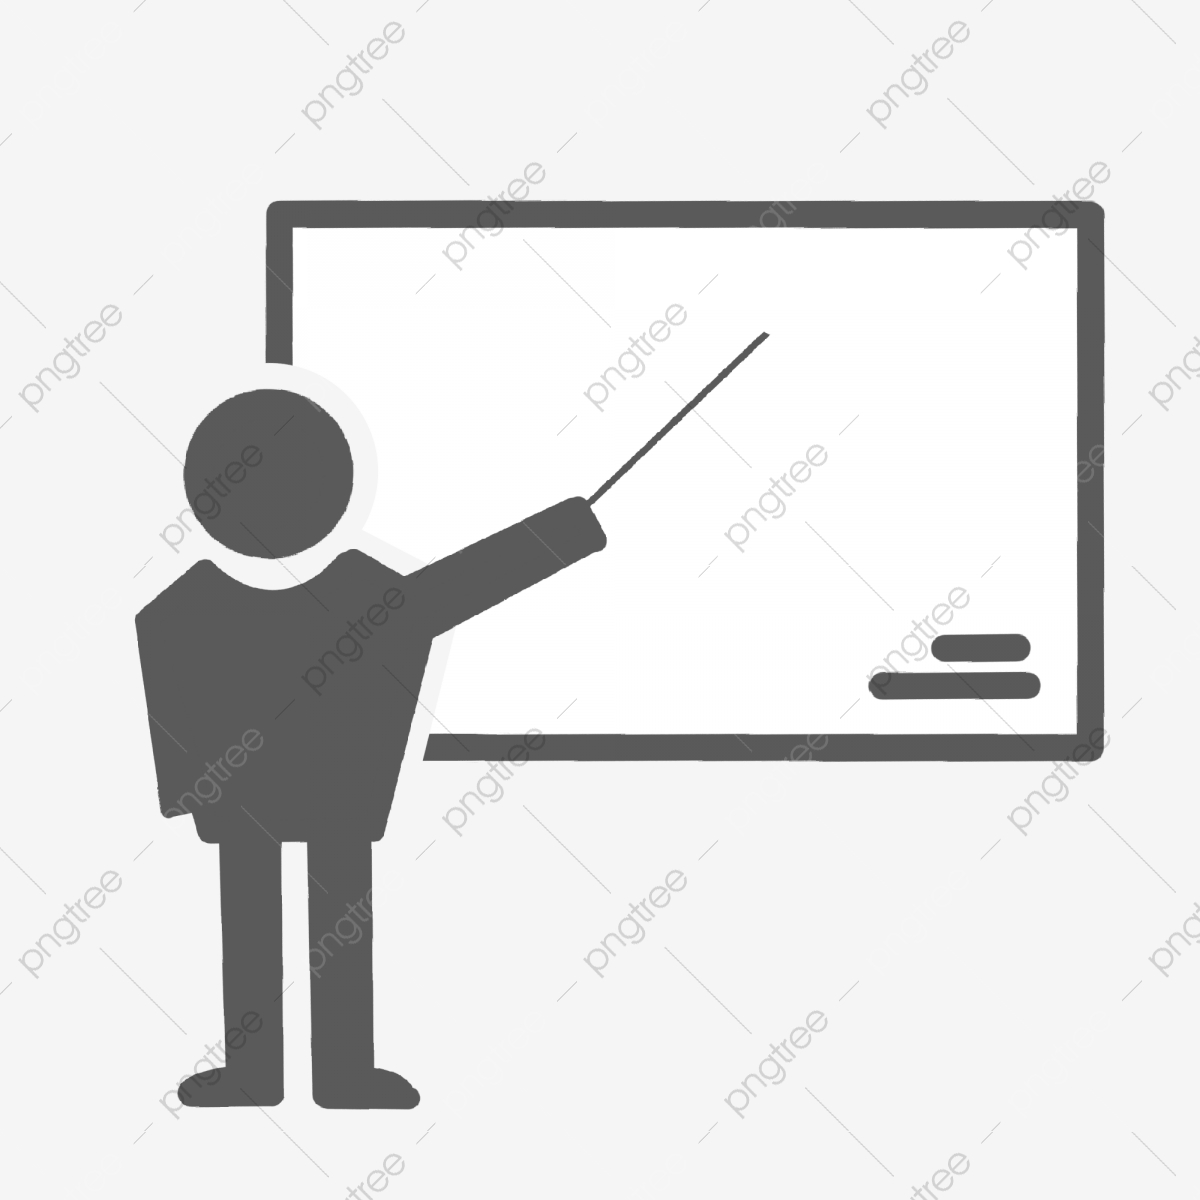 Pngtree Teacher Class Explanation Style Resume Icon Png Image 4523098